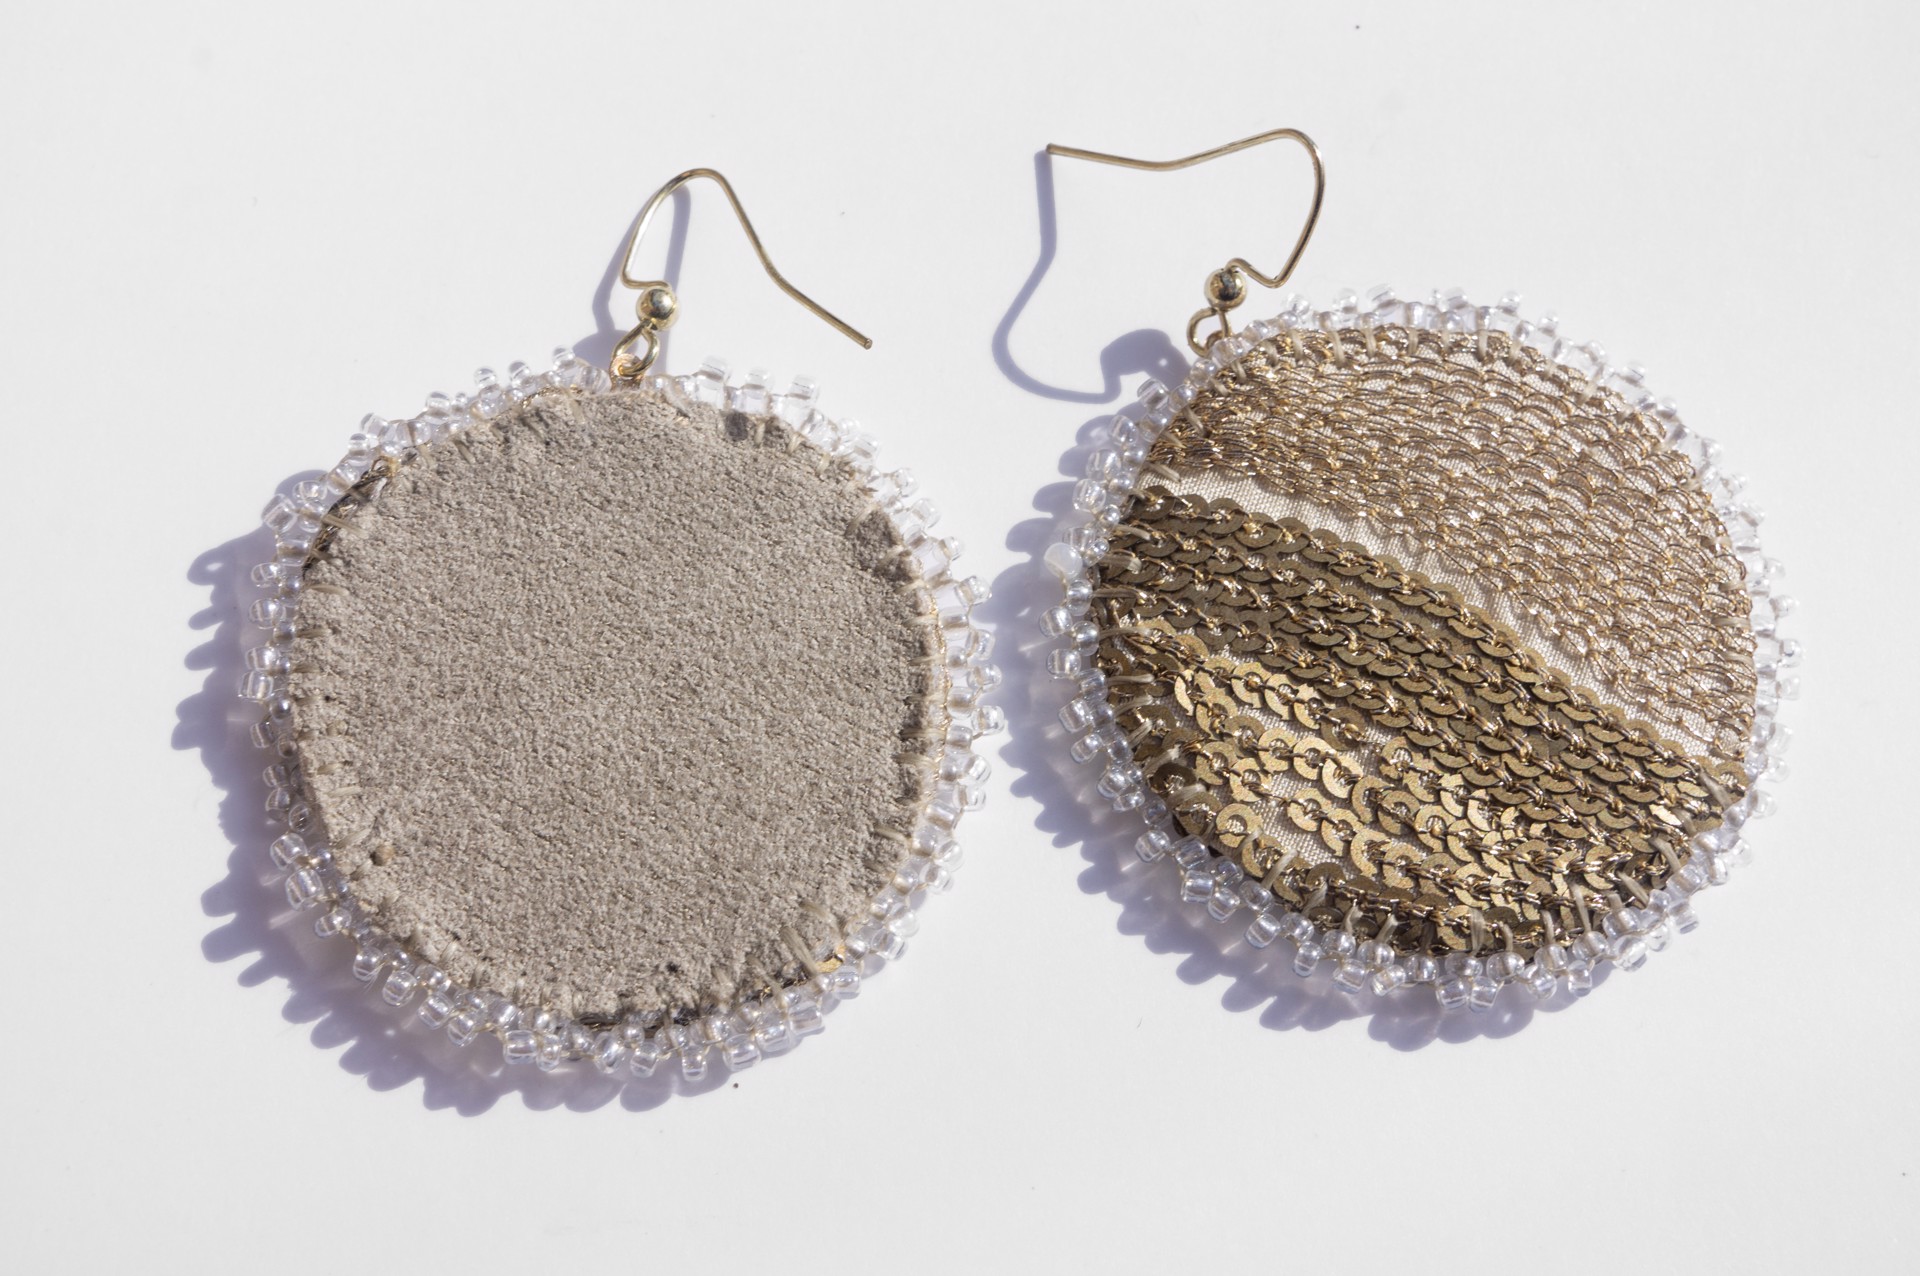 Sequin and embroidery earrings by Hattie Lee Mendoza